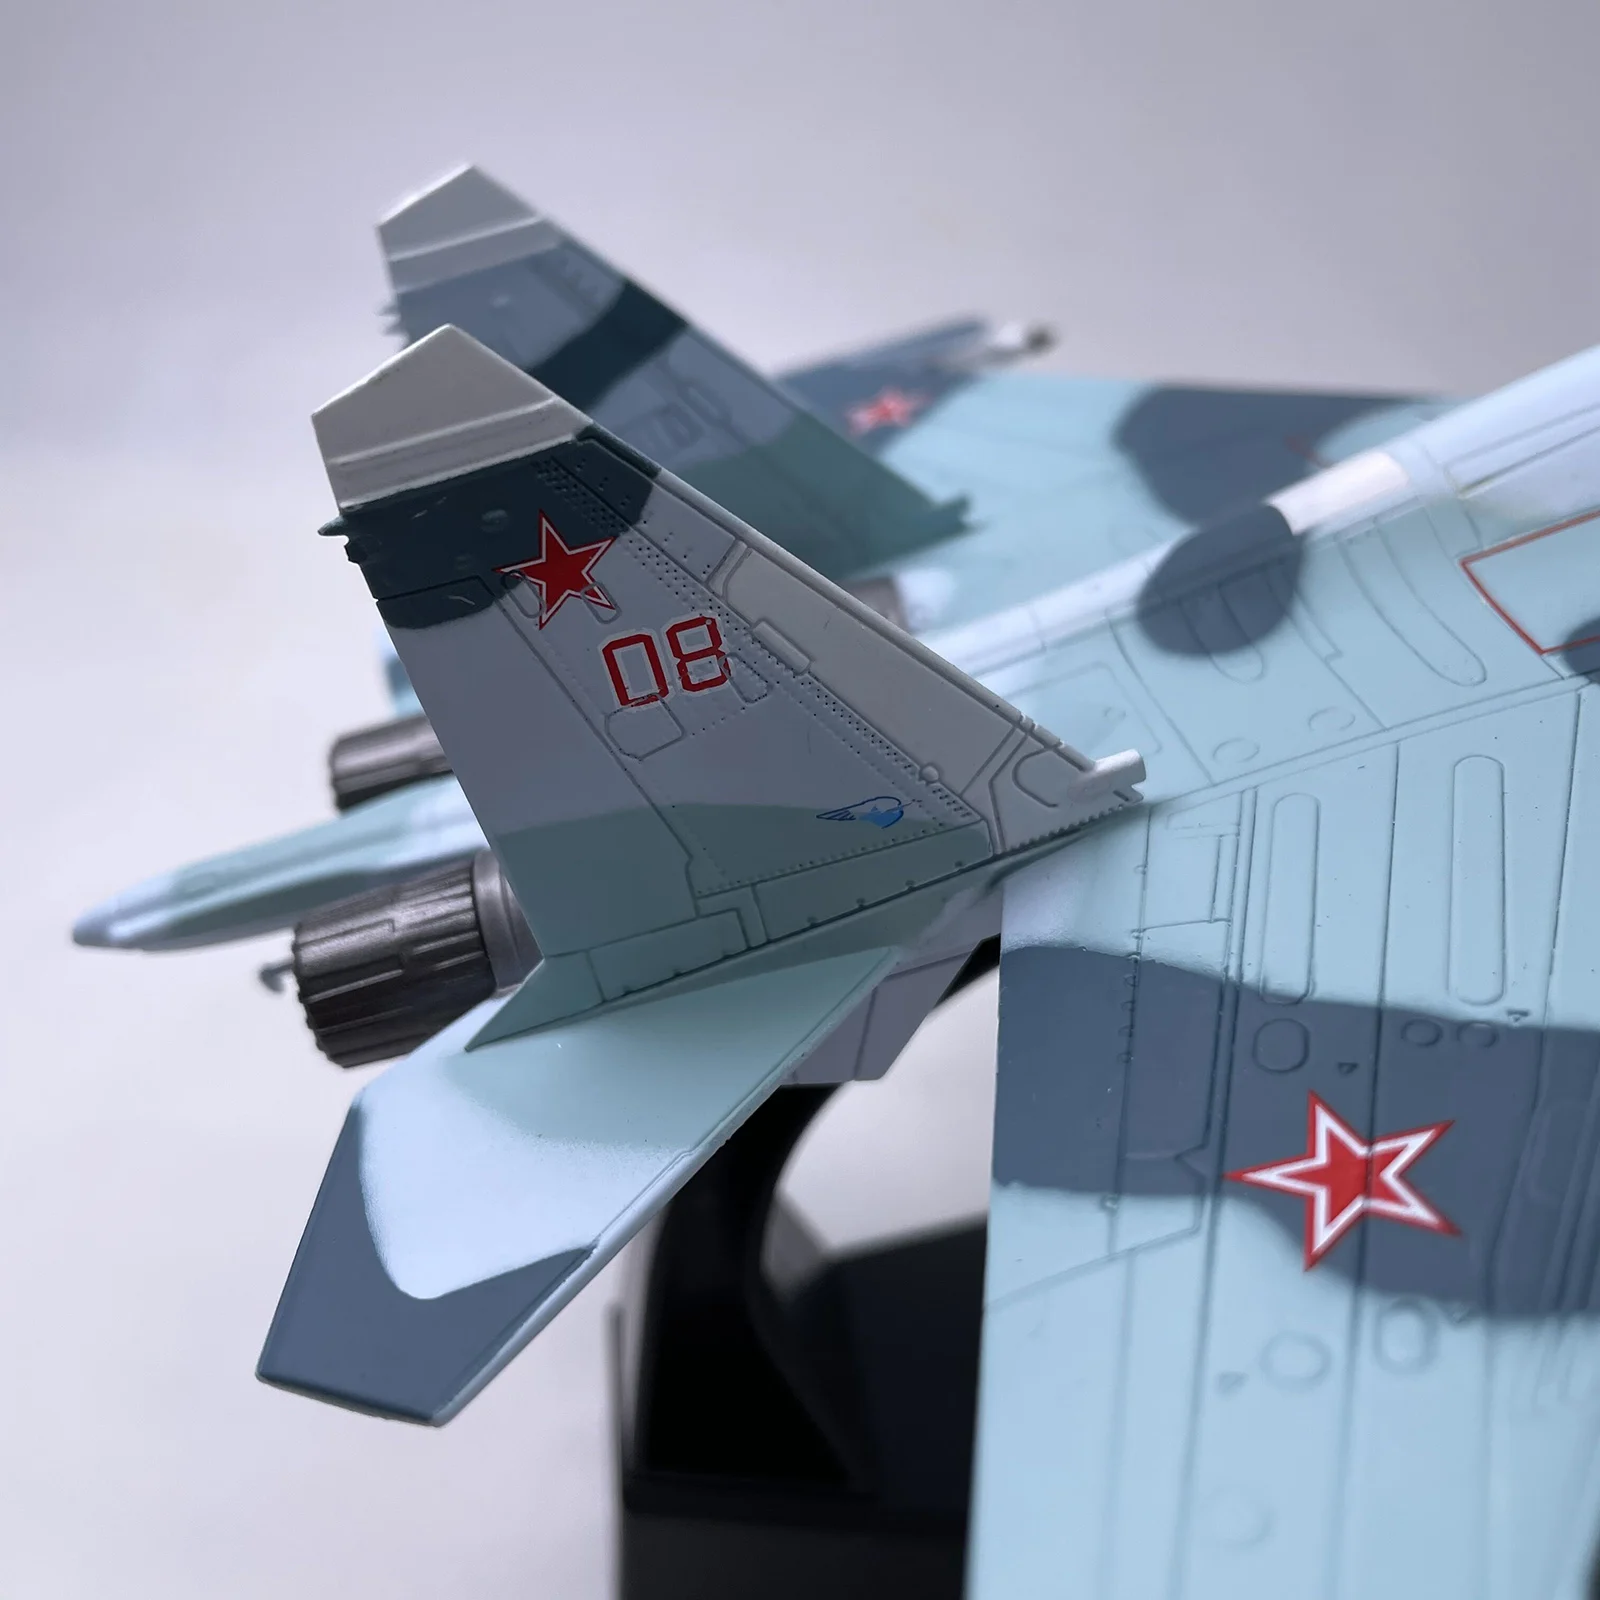 

1:100 Sukhoi Su-27 Russian Aiecraft Diecast Fighter Aircraft Model Airforce Plane Toy